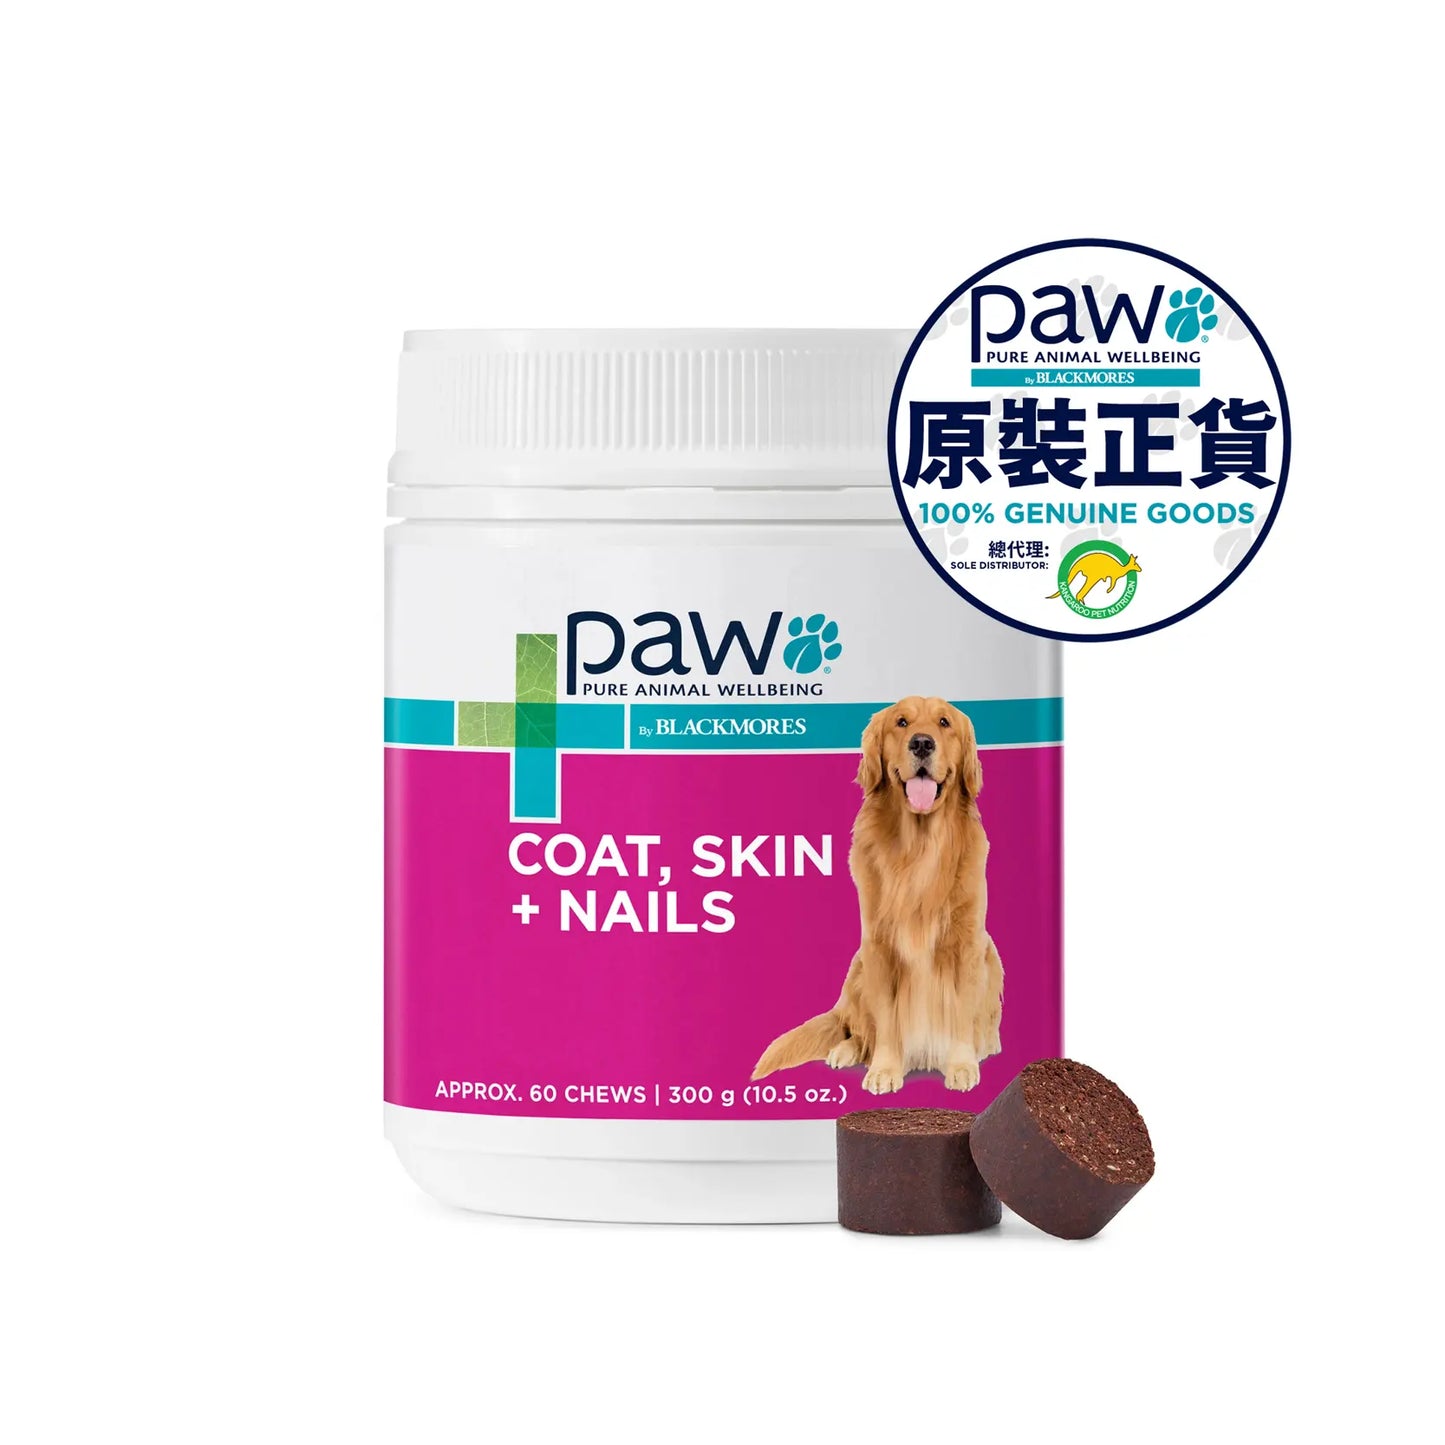 PAW - Coat, Skin And Nails Chew For Dogs 300g - 60 ChewsPAW - Coat, Skin And Nails Chew For Dogs 300g - 60 Chews